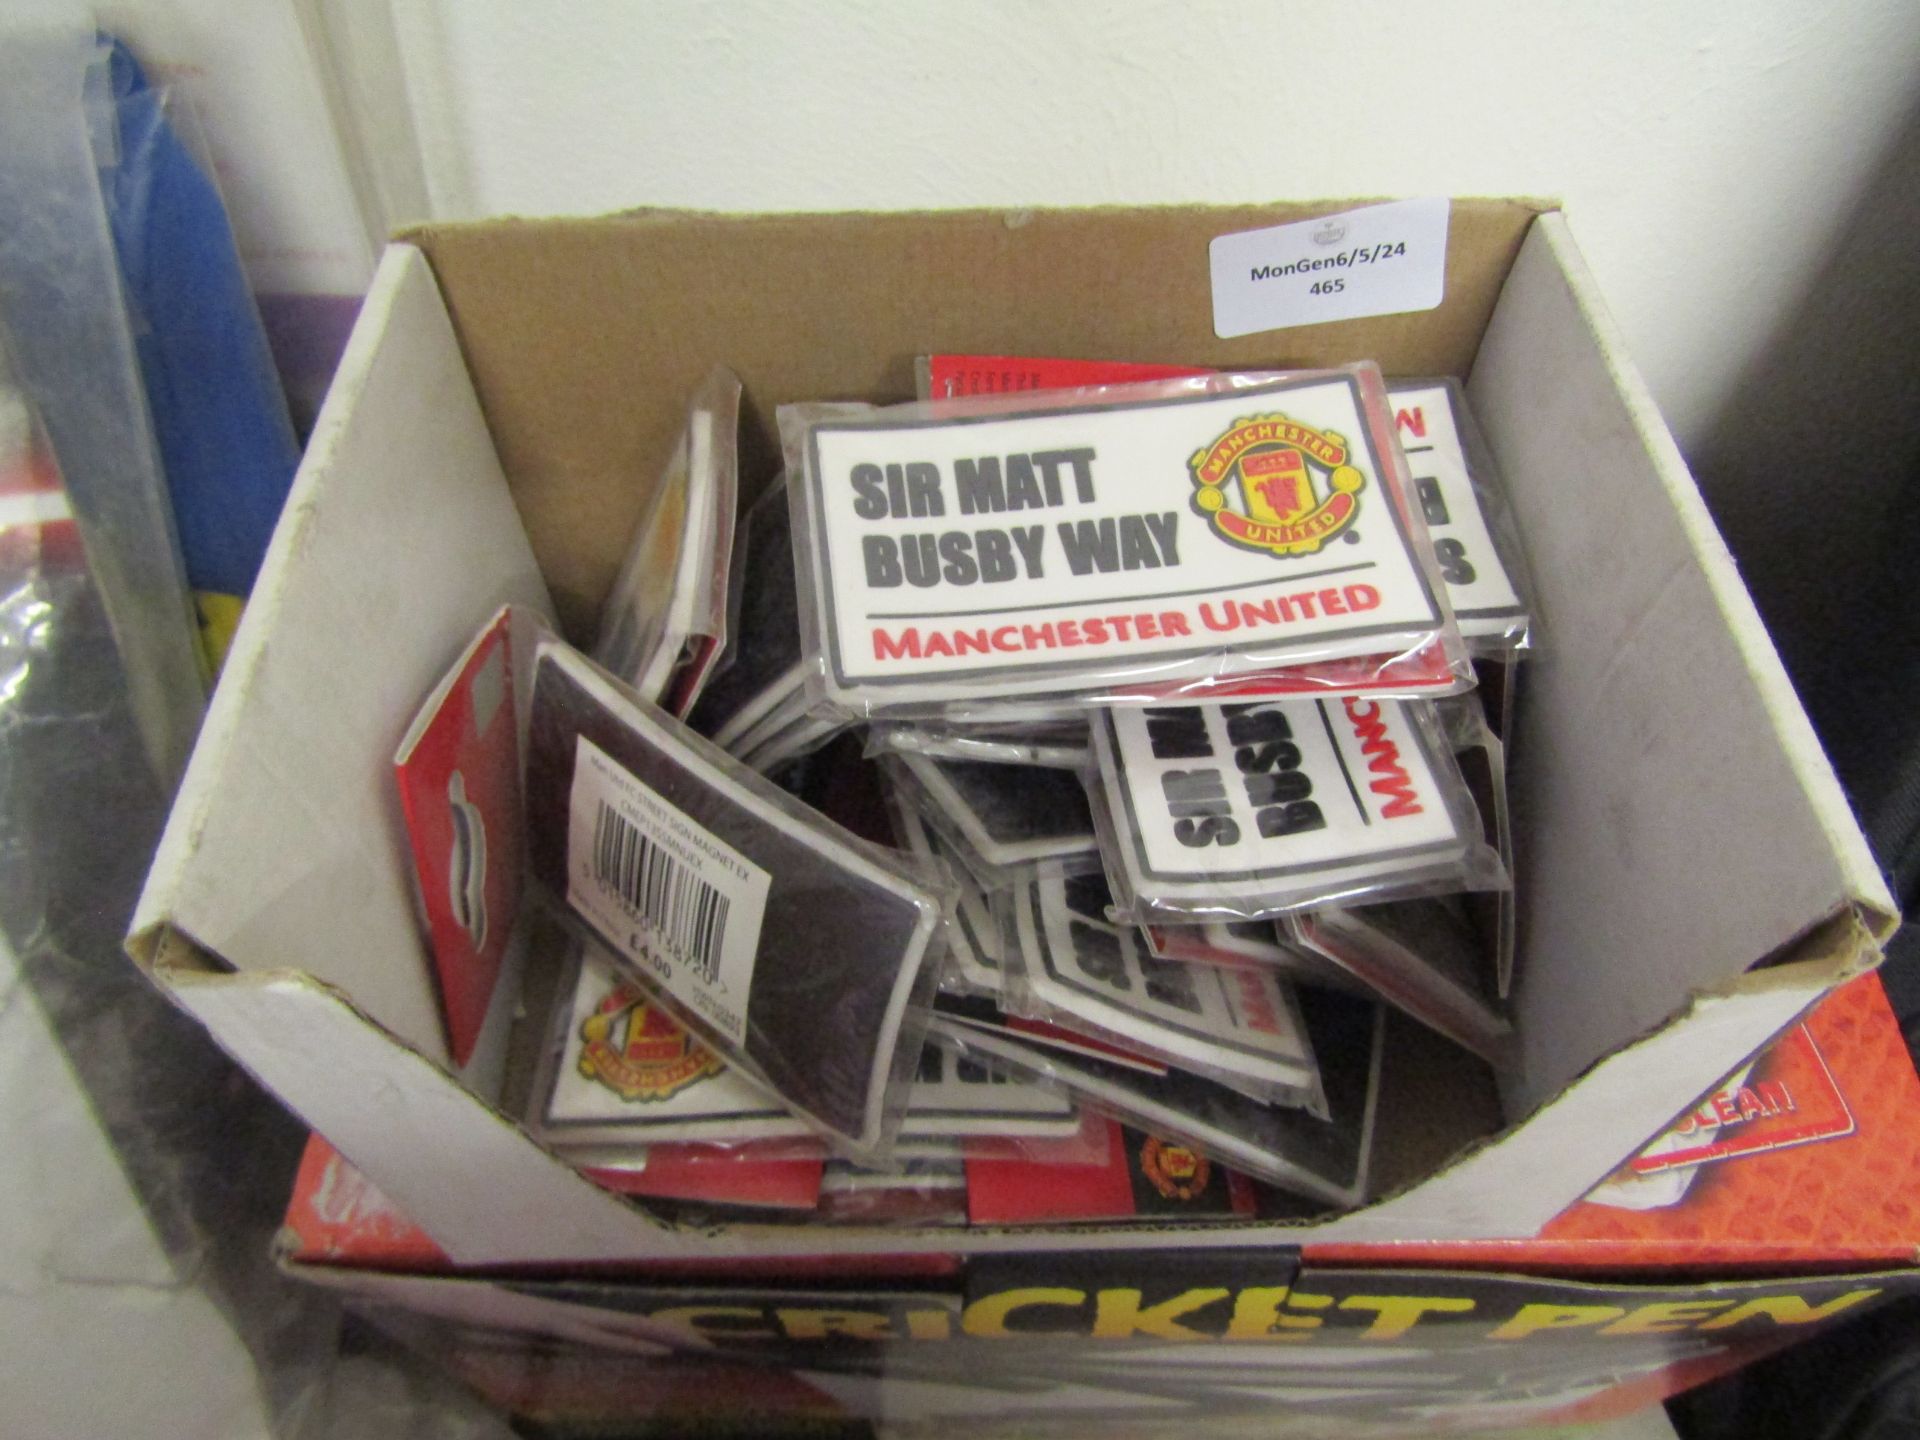 Box Of Approx 20x Manchester United Sir Matt Busby Way Fridge Magnet. All Look To Be Still In